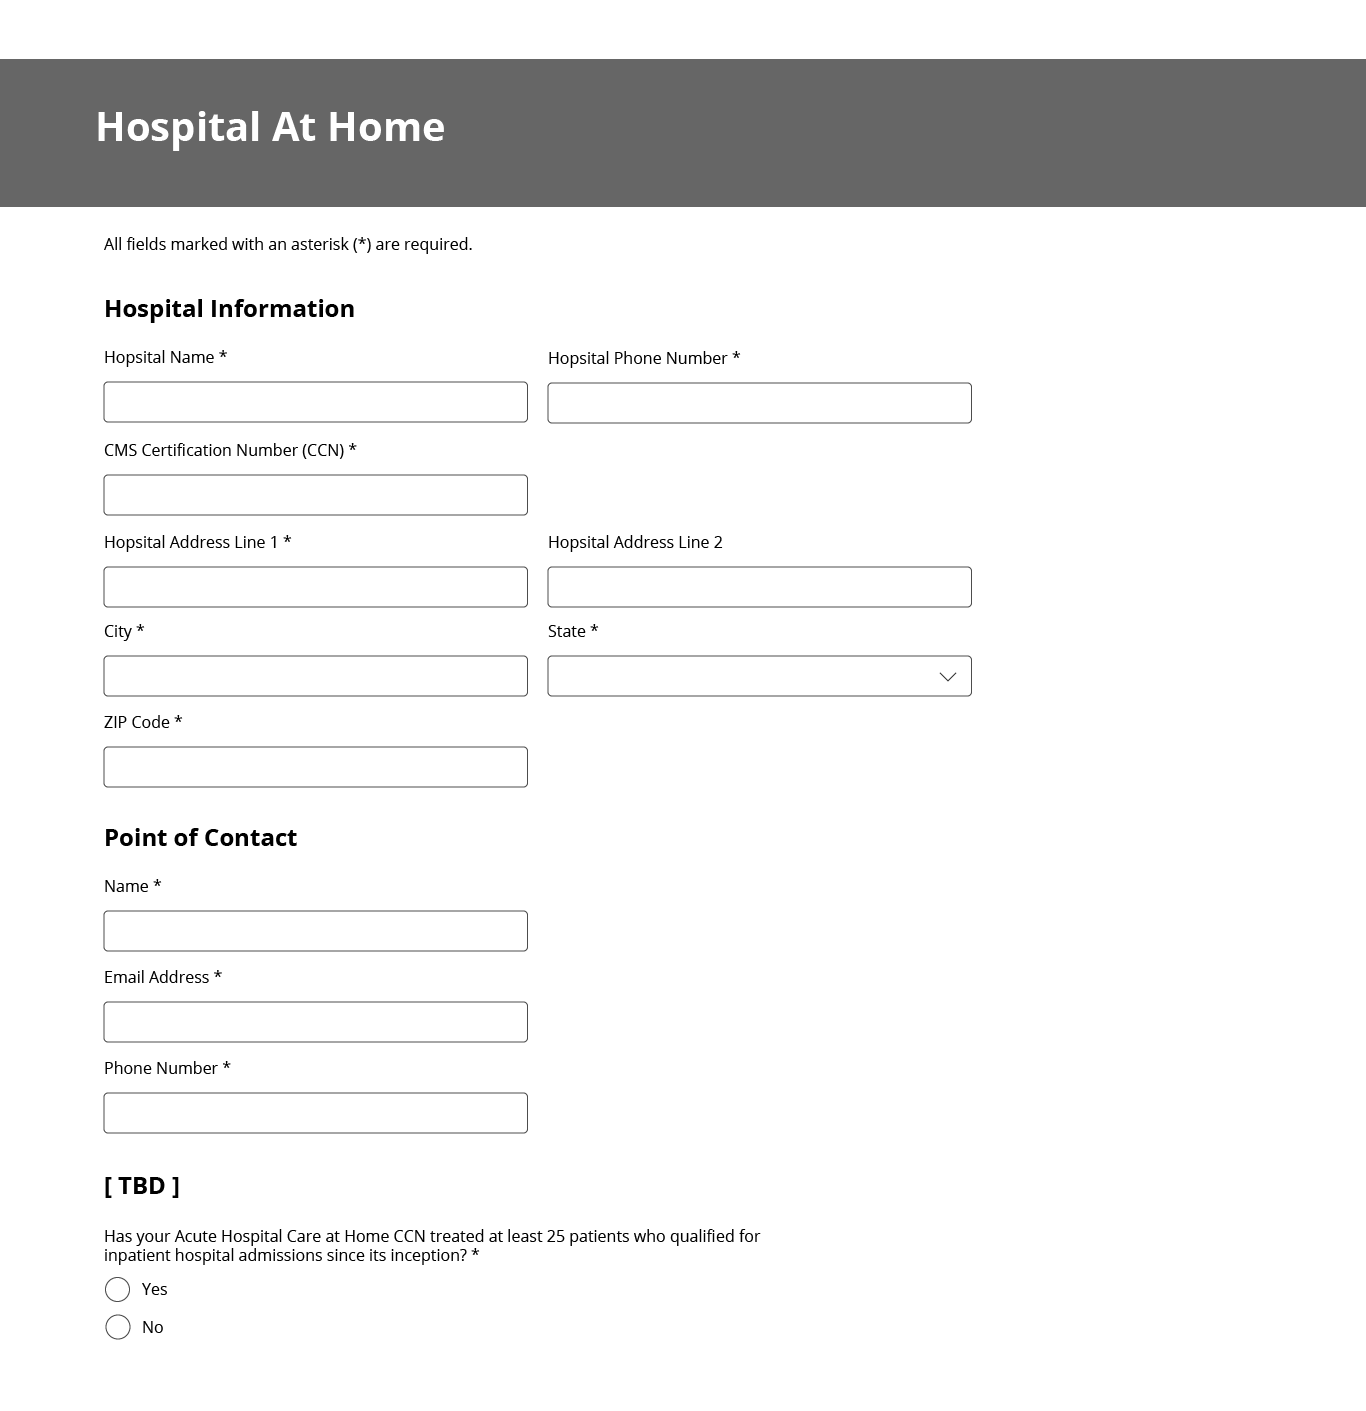 AHCAH waiver request wireframe